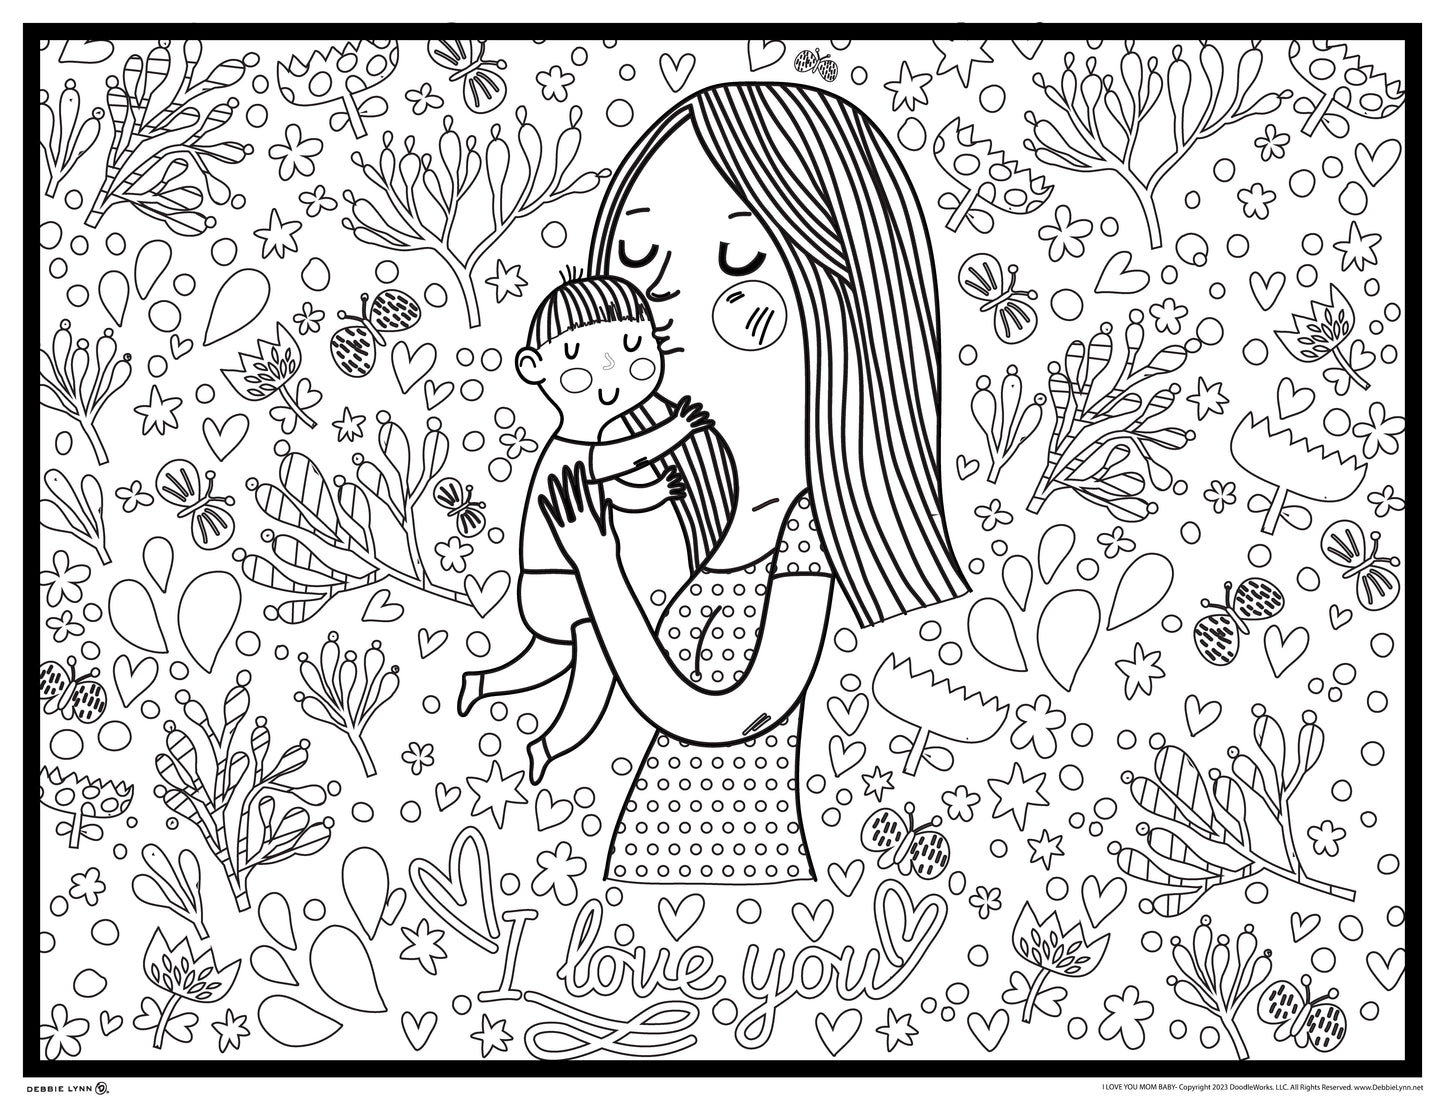 I Love You Mom Personalized Giant Coloring Poster 46"x60"